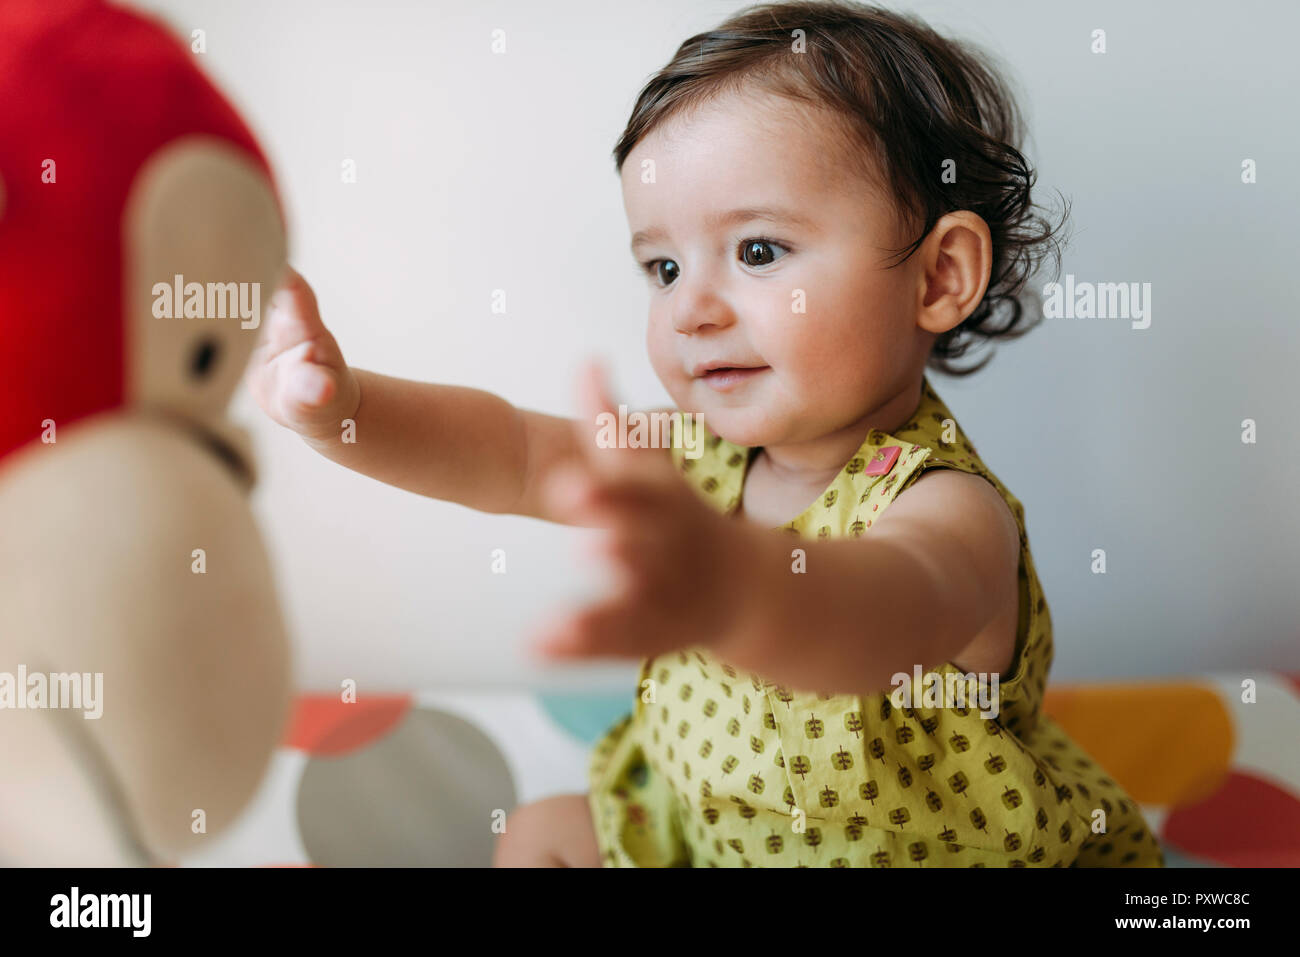 Baby girl playing with a cuddly toy Stock Photo